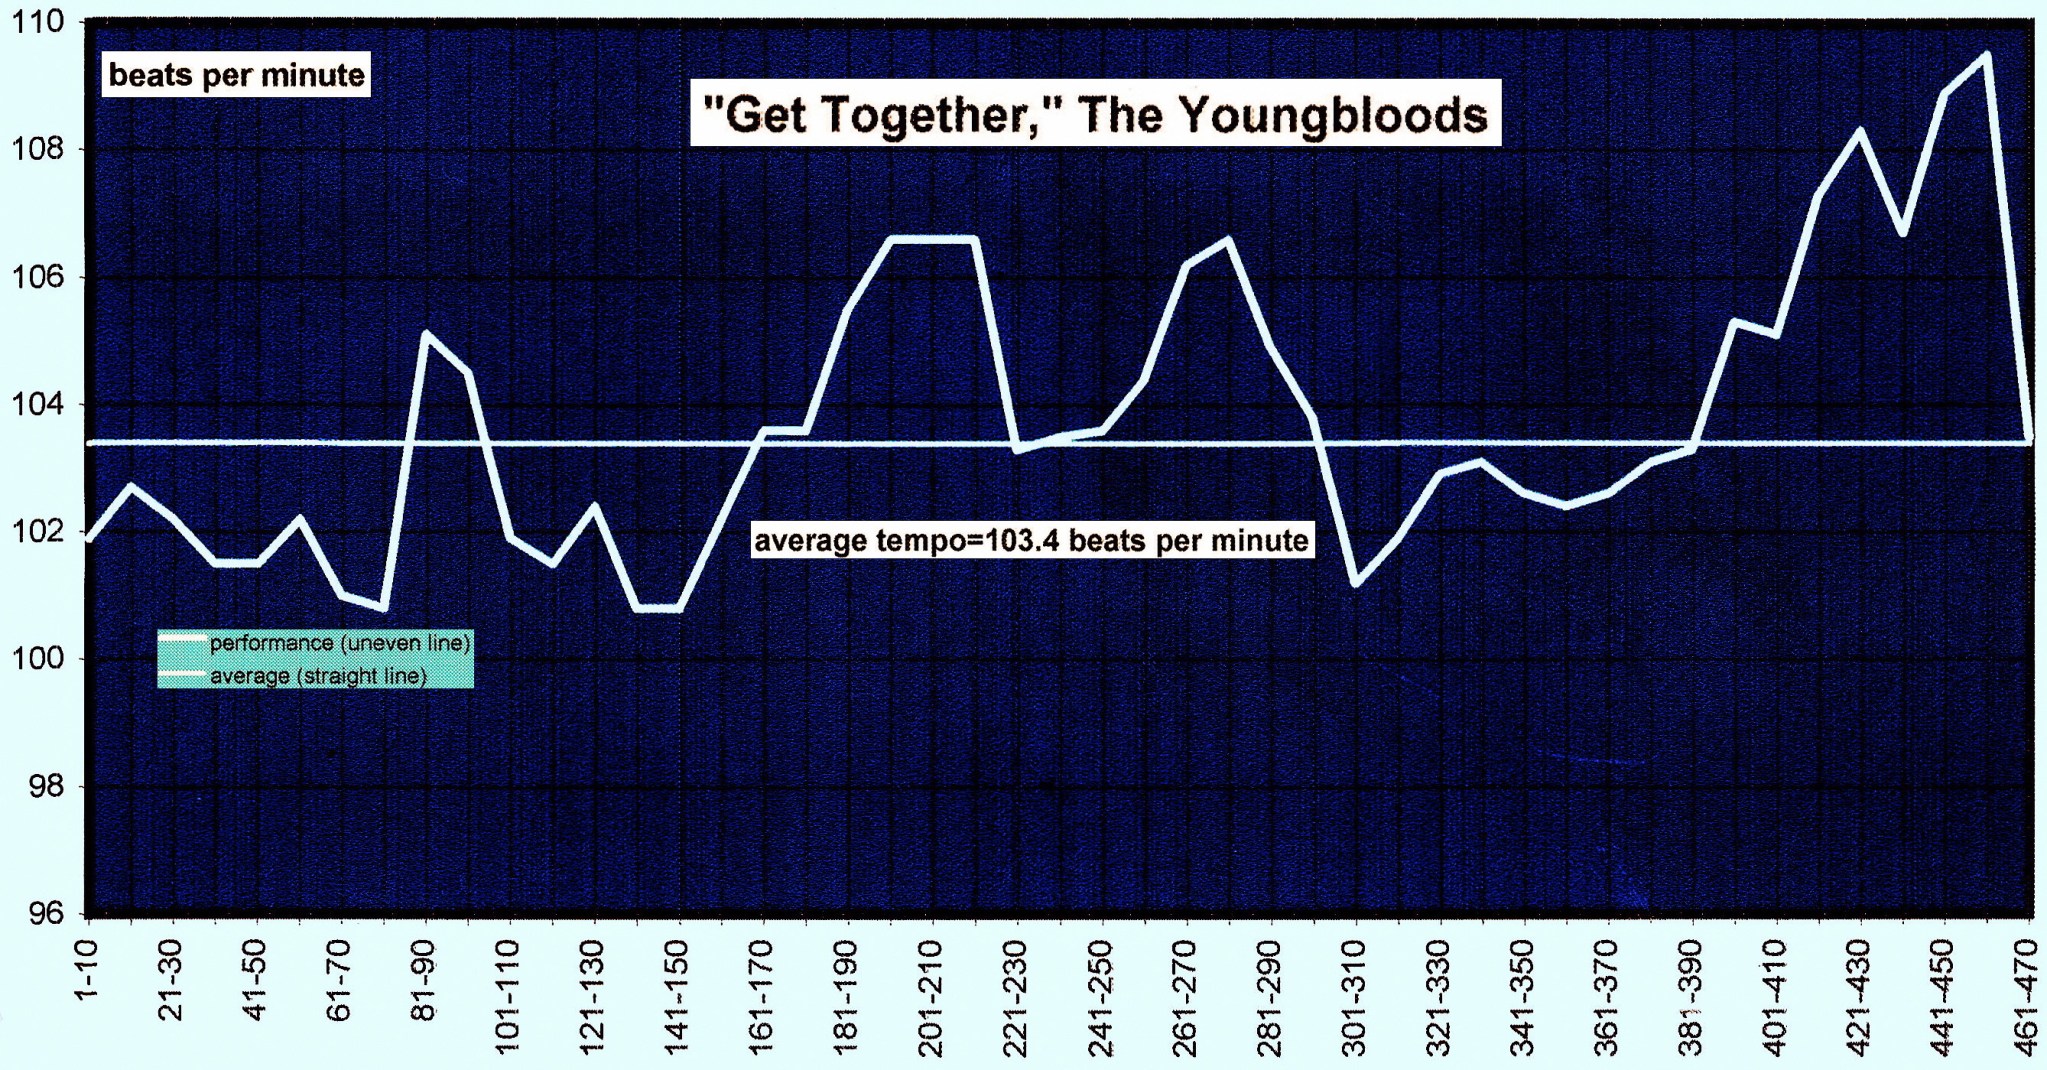 music-tempo-map Get-Together-The-Youngbloods-matherton-tempo-chart